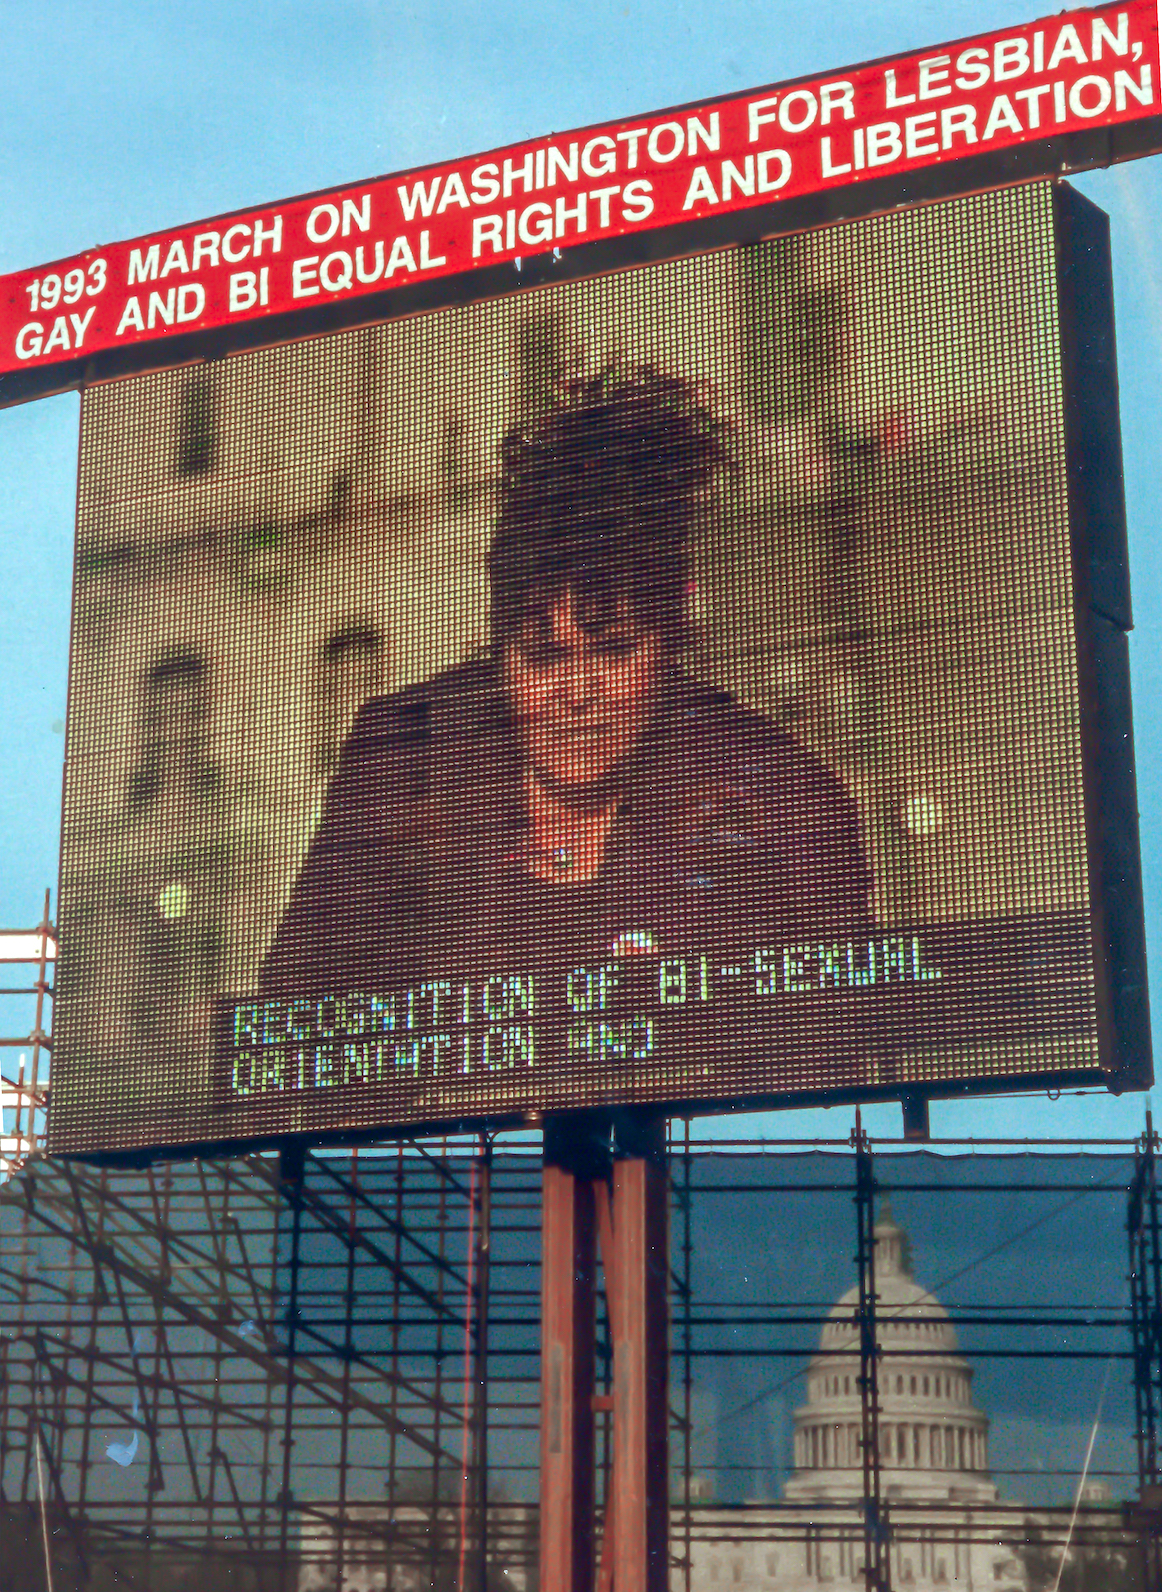 Lani was the only bisexual invited to speak on the main stage at the March on Washington for Lesbian, Gay & Bi Equal Rights and Liberation, 1993.